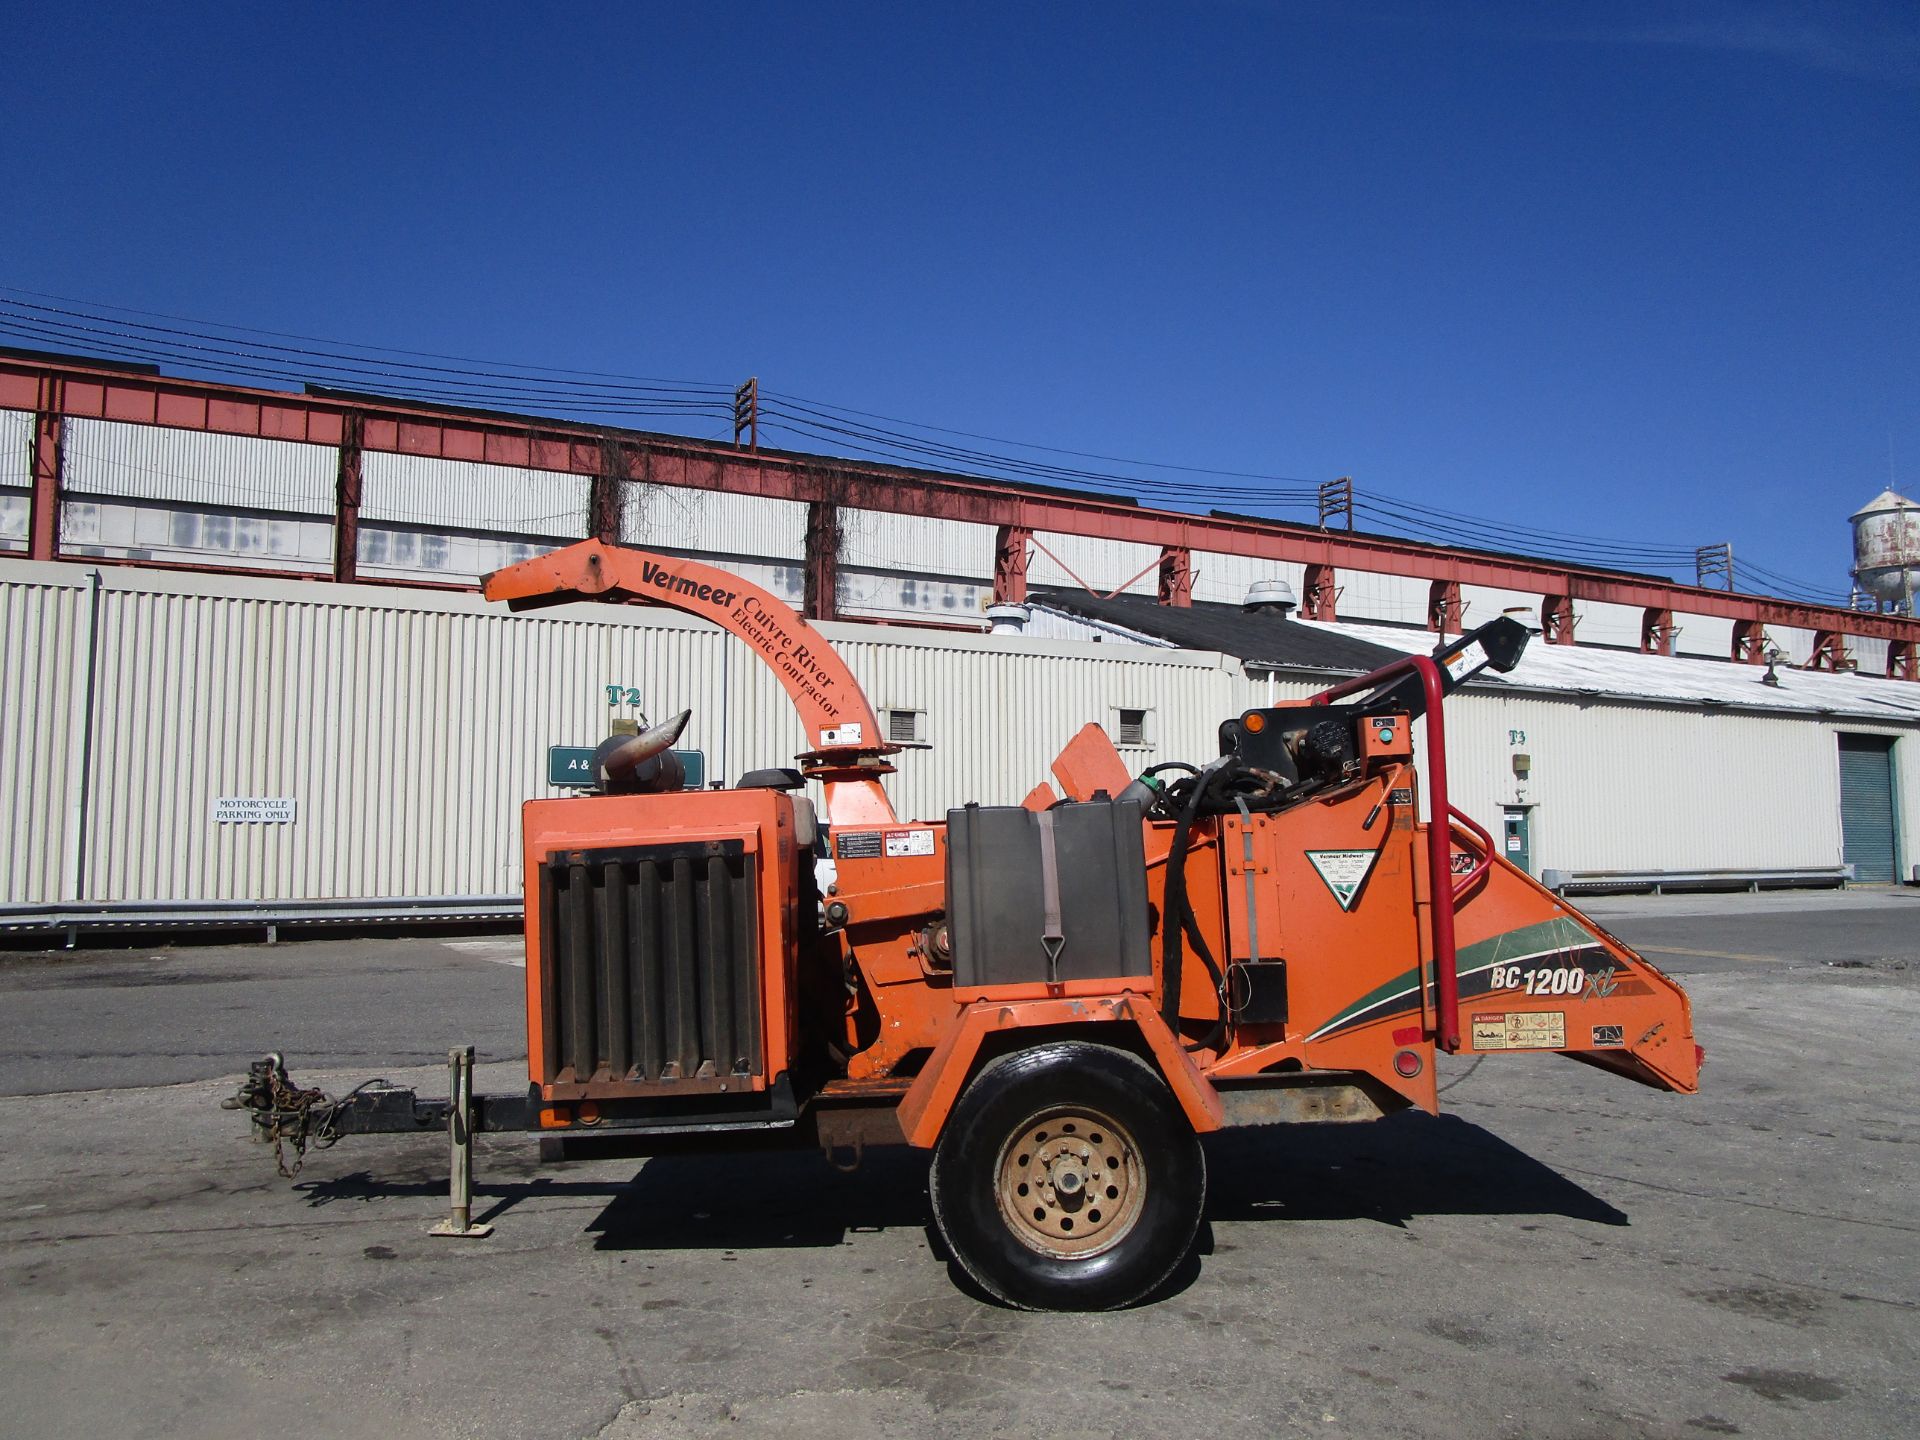 2011 Vermeer BC1200 Chipper - Image 2 of 10